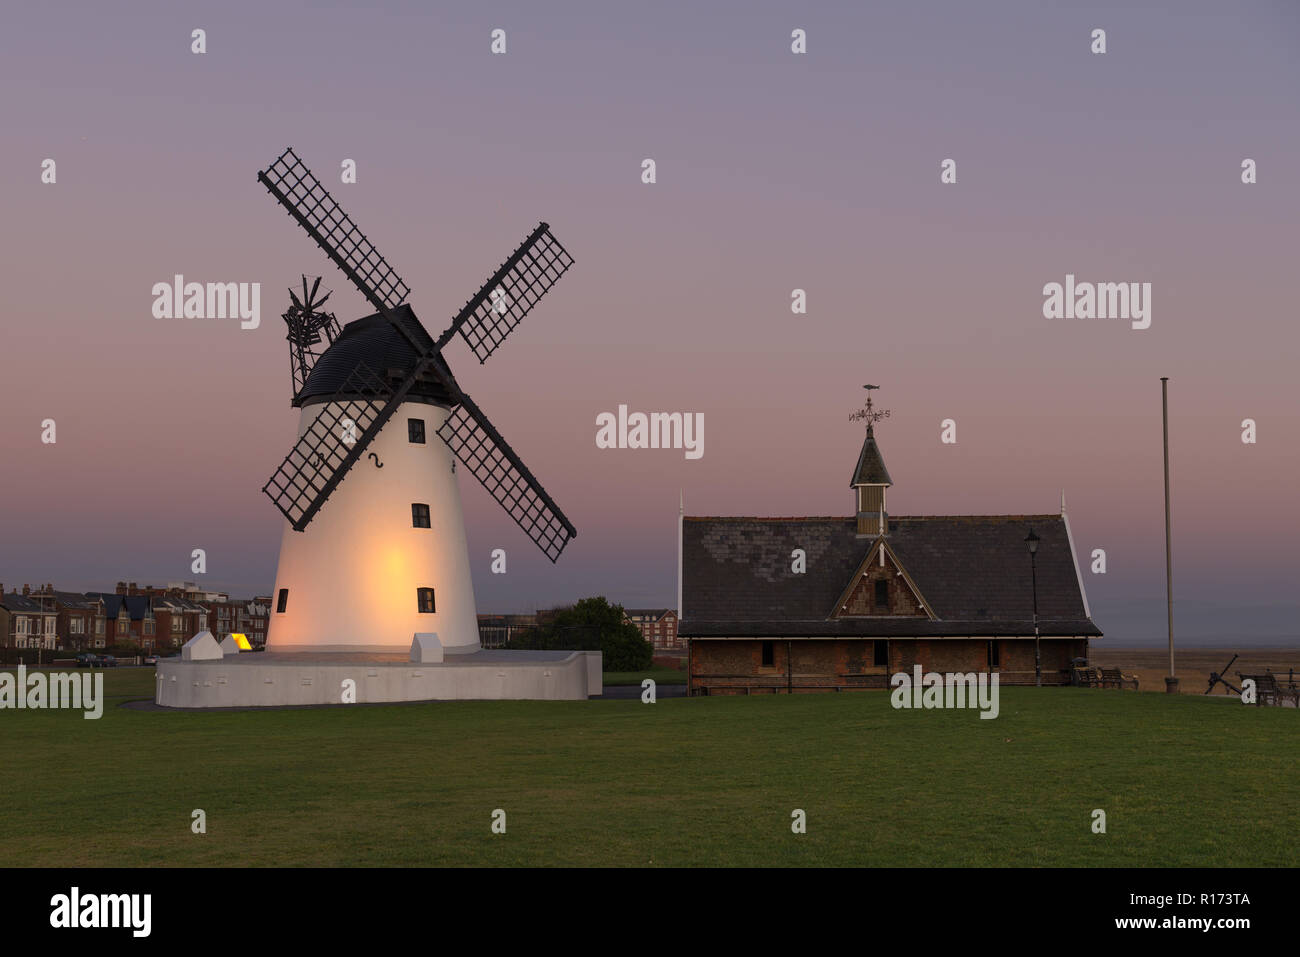 Lytham Windmill Banque D'Images